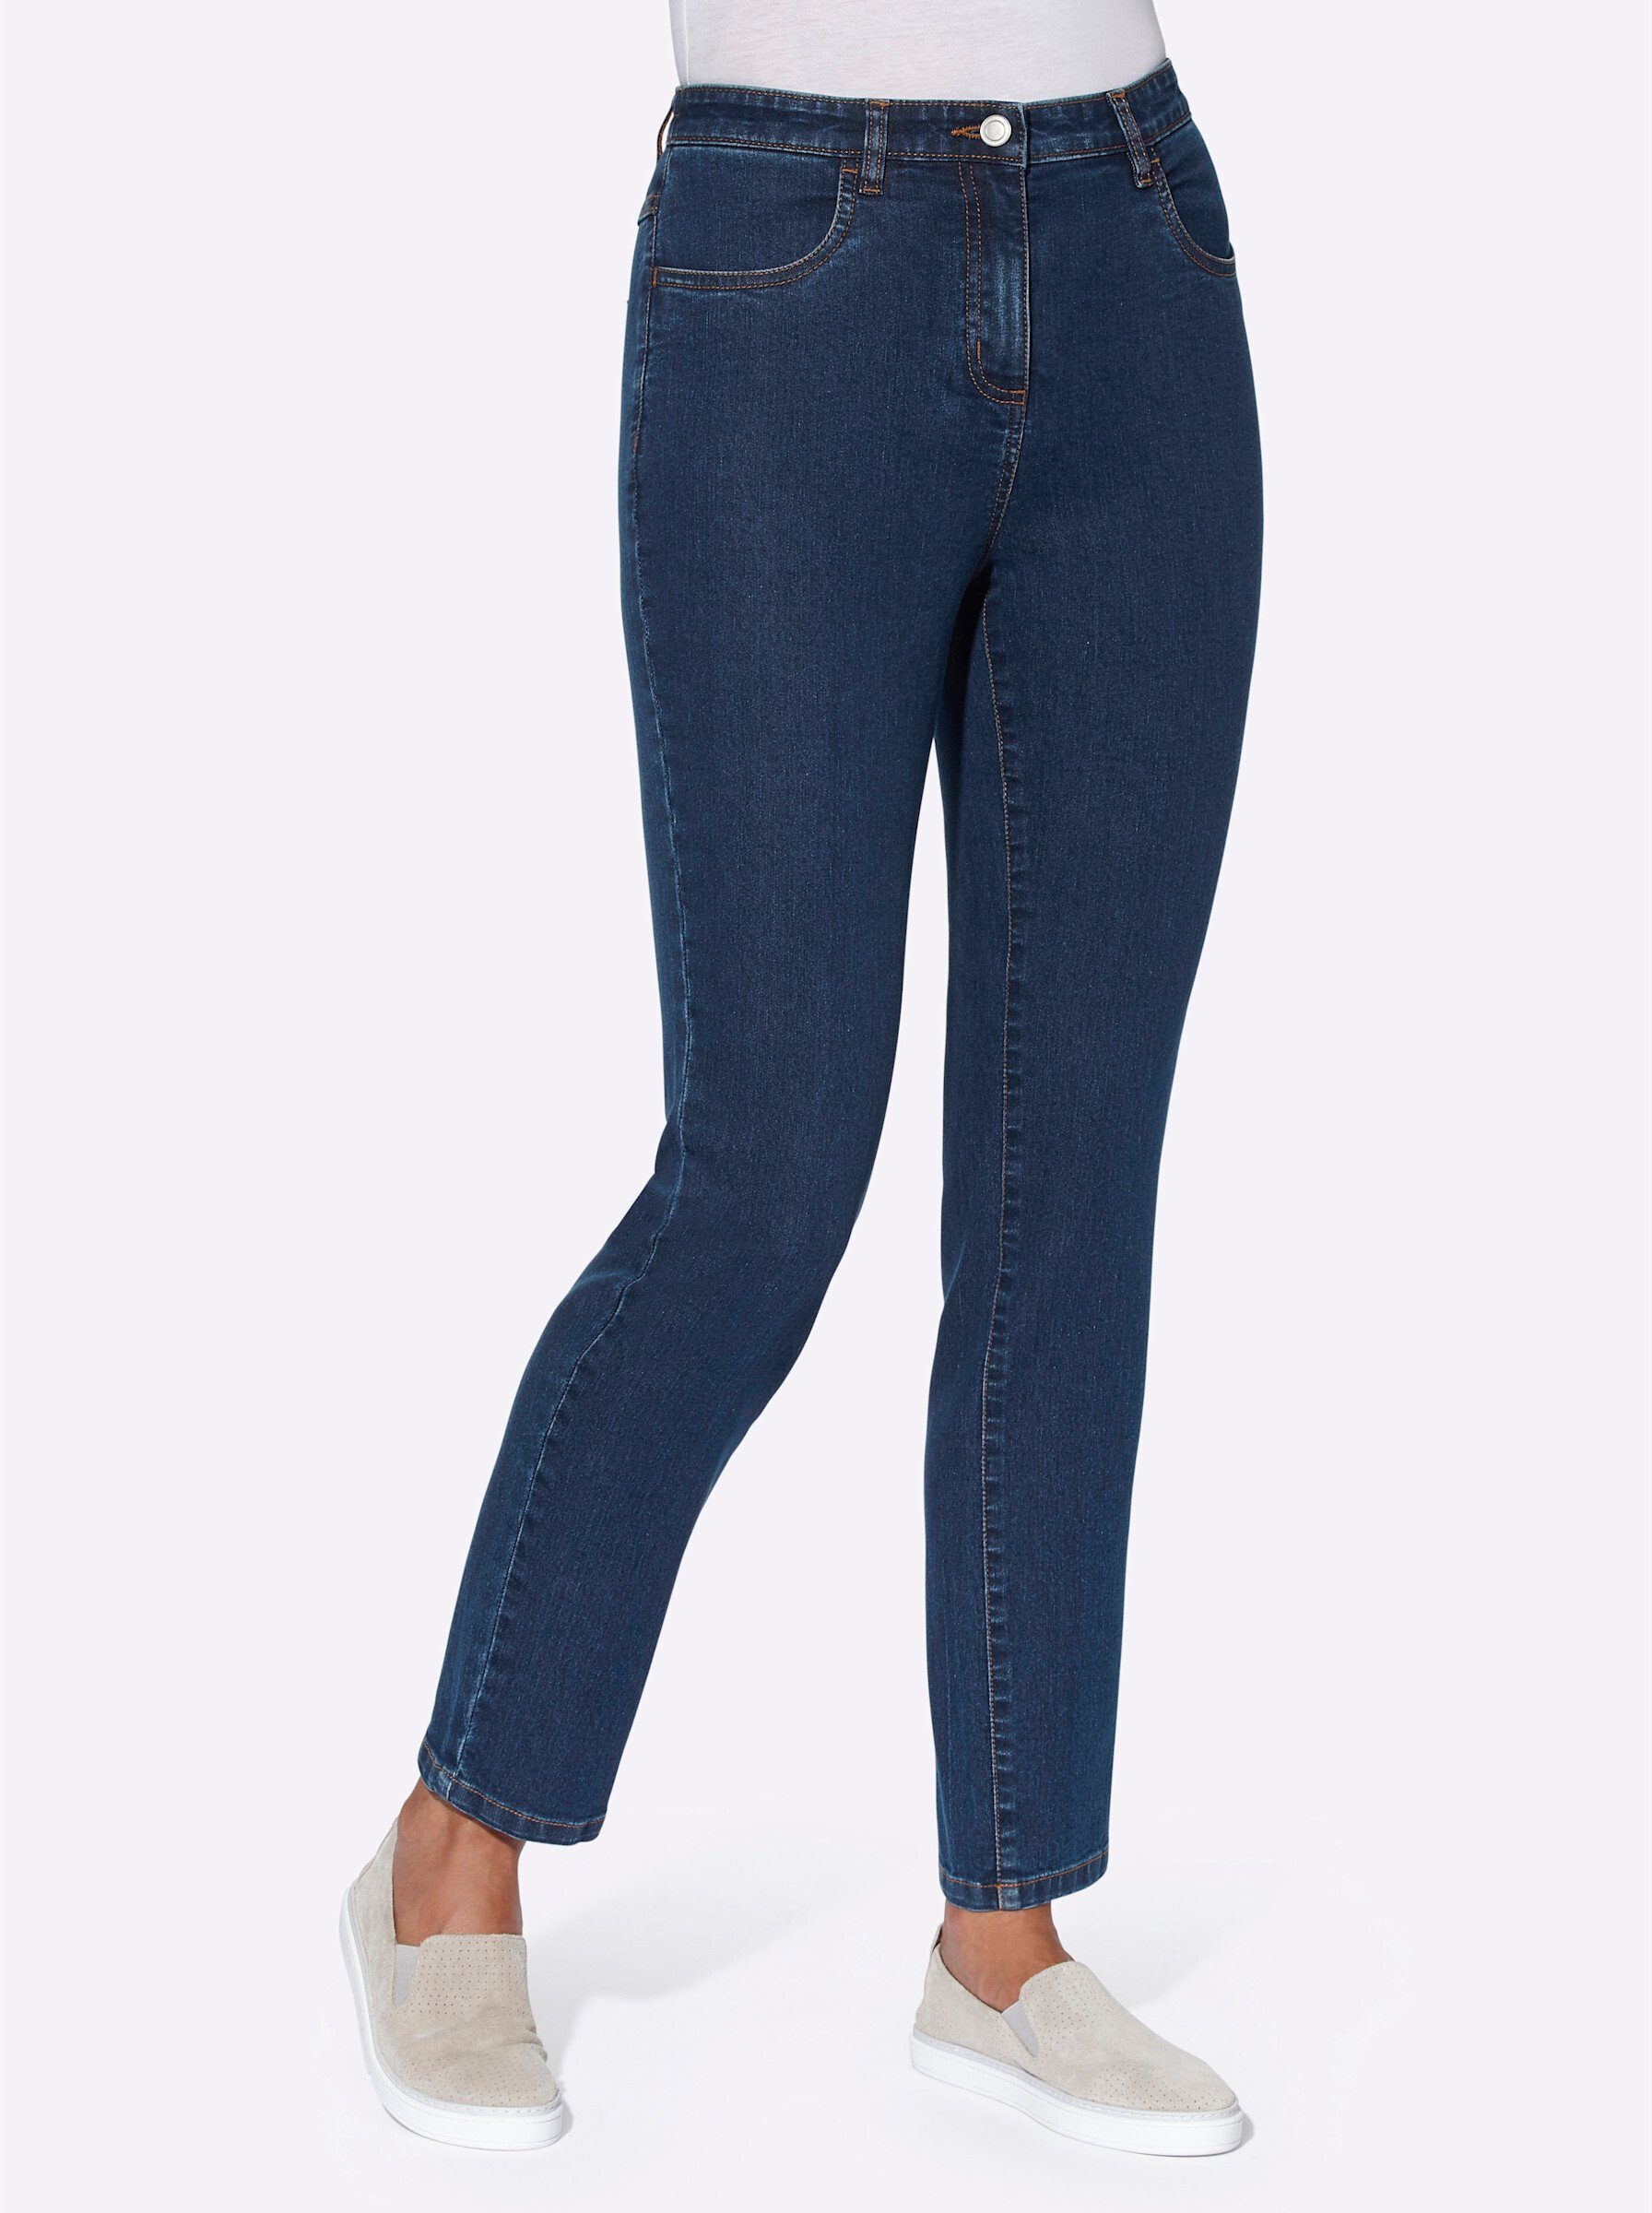 Jeans blue-stone-washed an! Bequeme Sieh